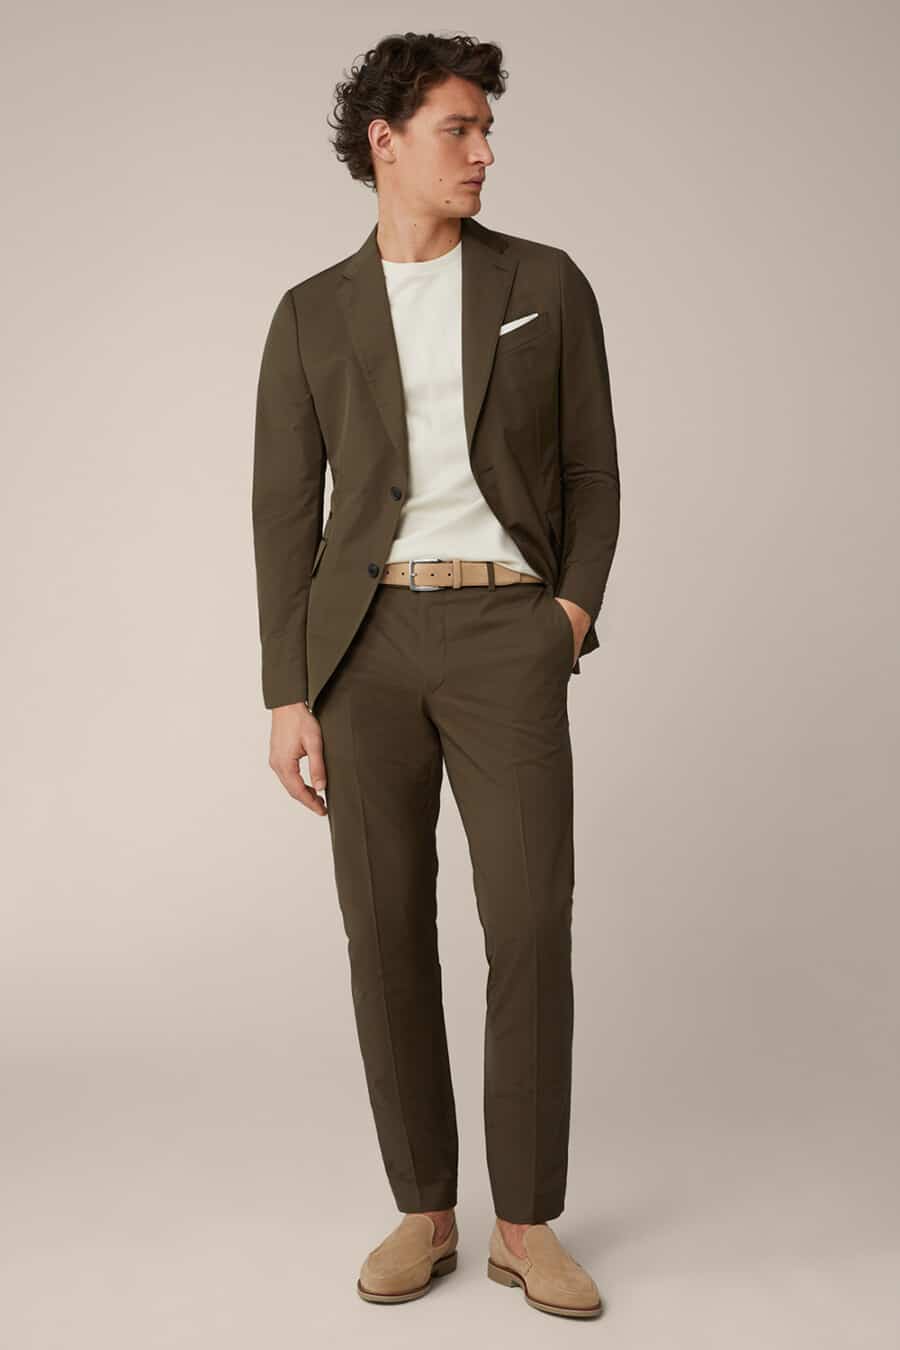 Men's olive green suit, white T-shirt and khaki suede shoes outfit